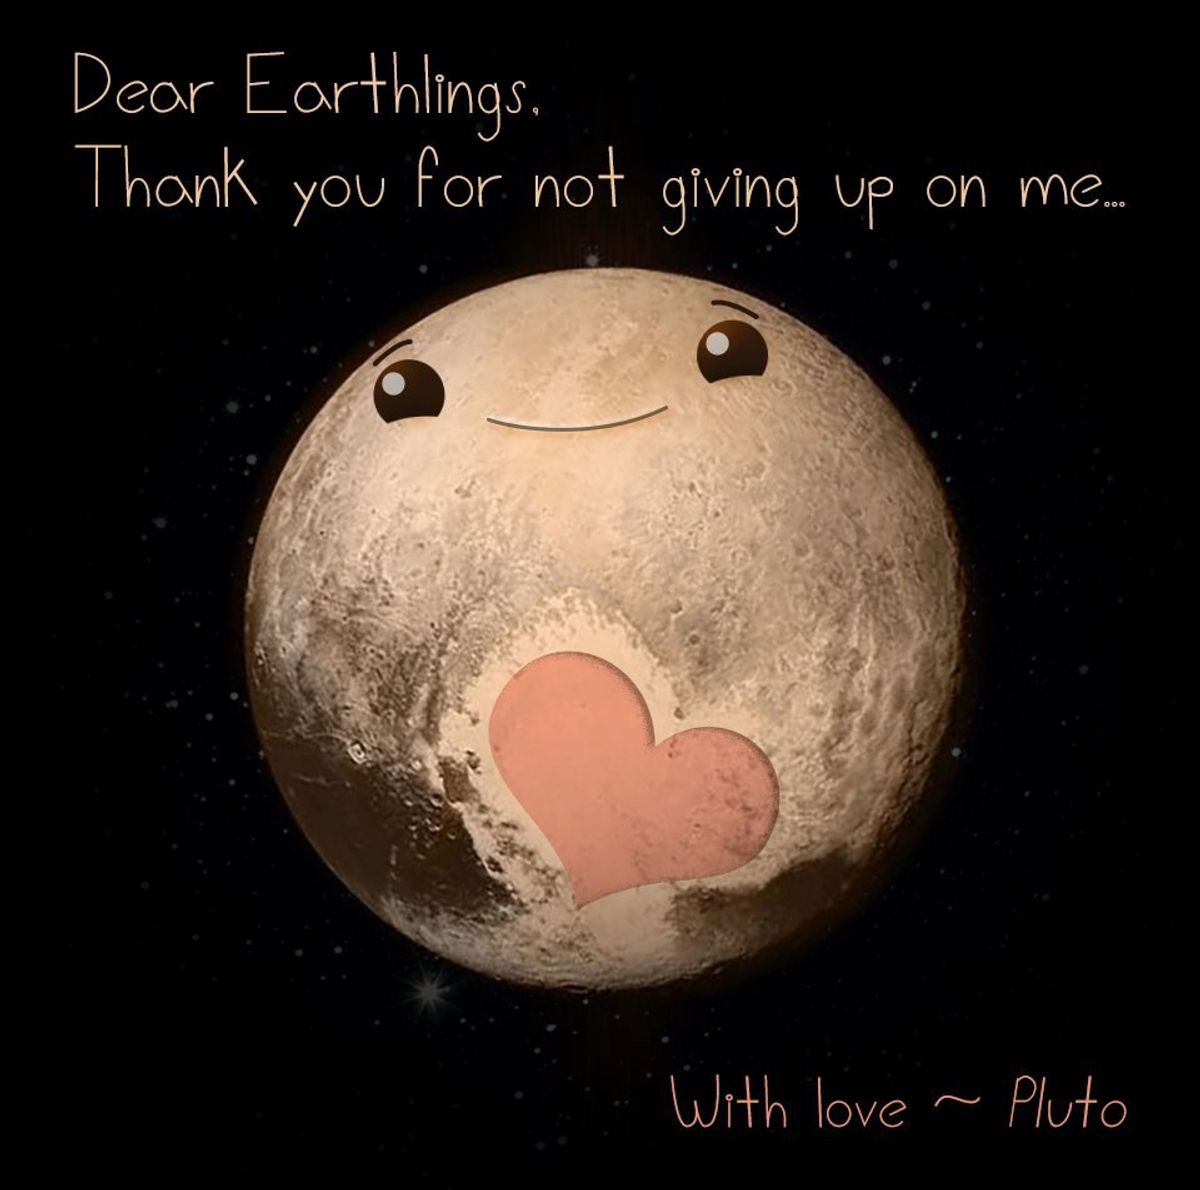 Why We Love Pluto